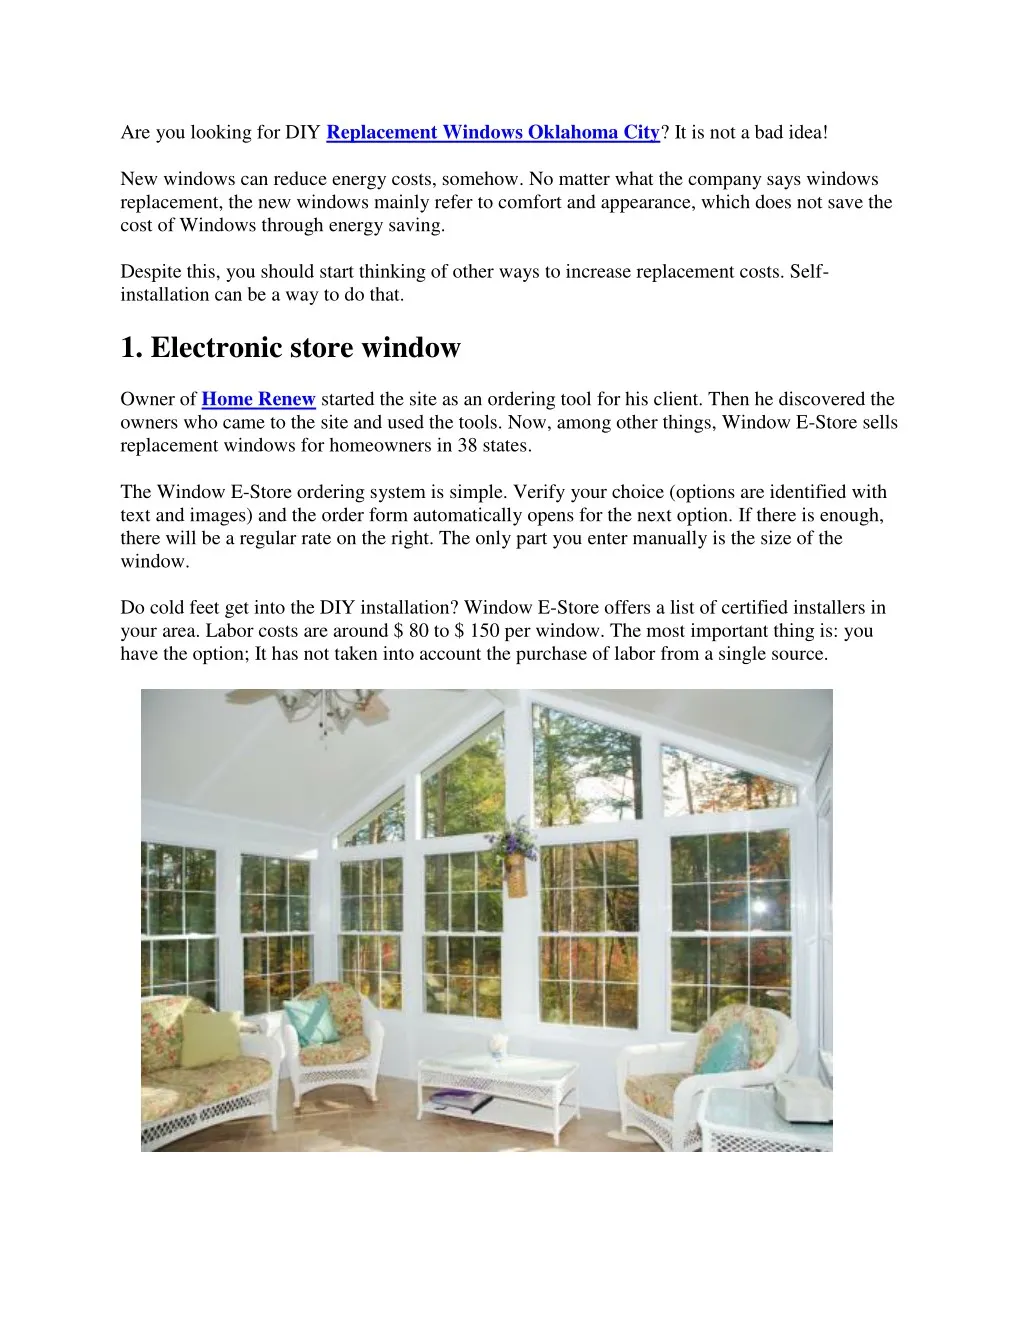 are you looking for diy replacement windows